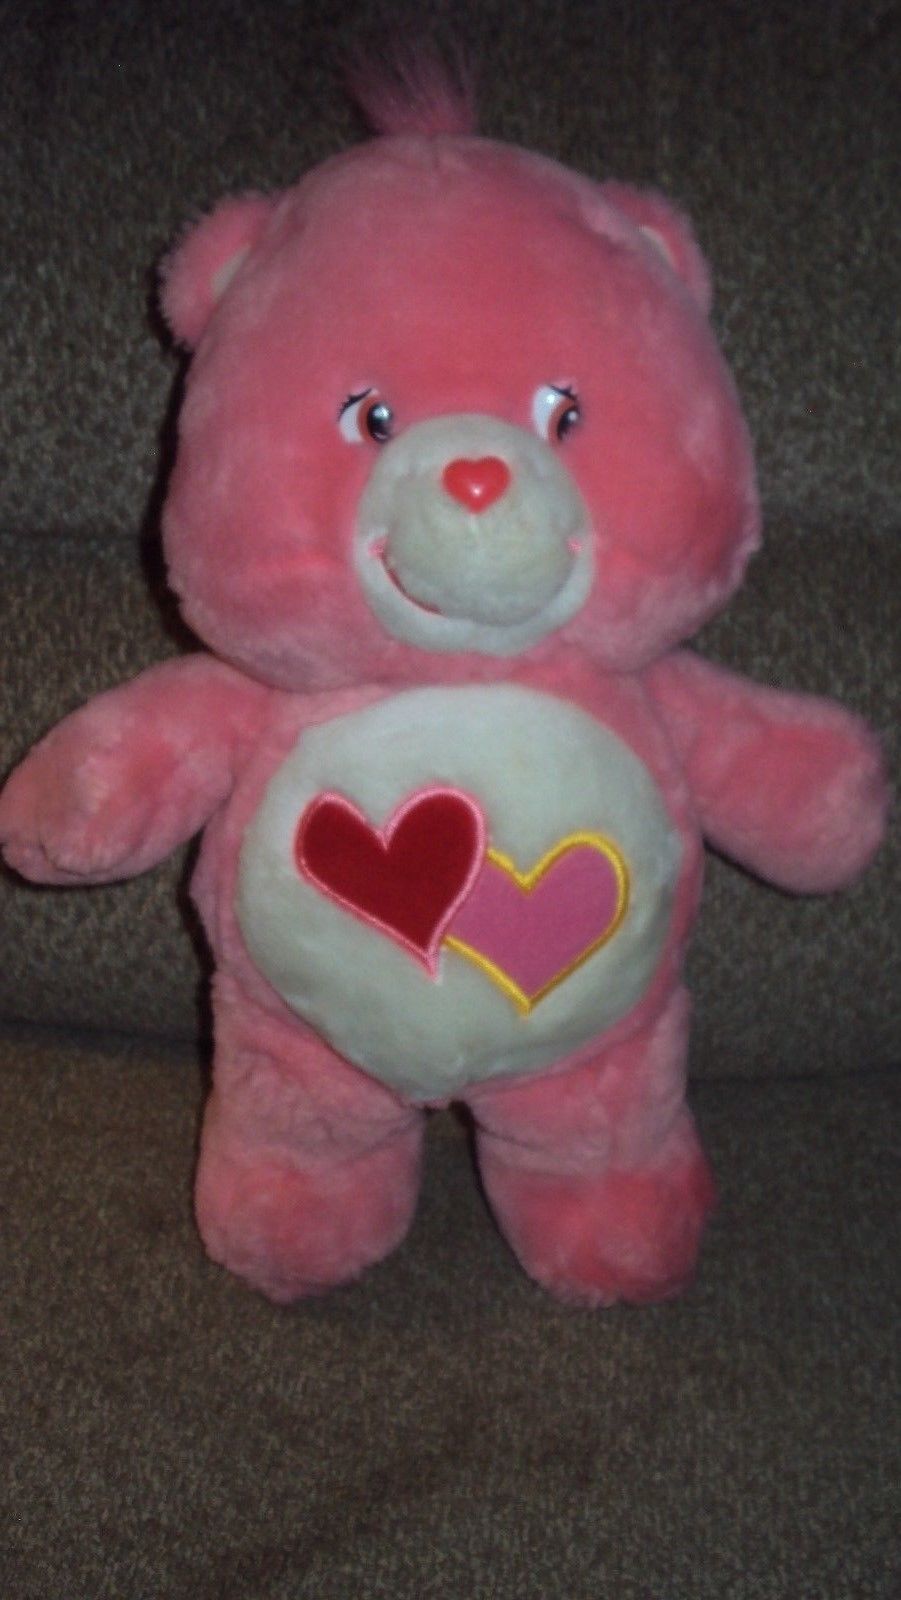 2002 CAREBEAR-LOVE A LOT BEAR PLUSH-PINK & RED HEART-EXCELLENT CONDITION!